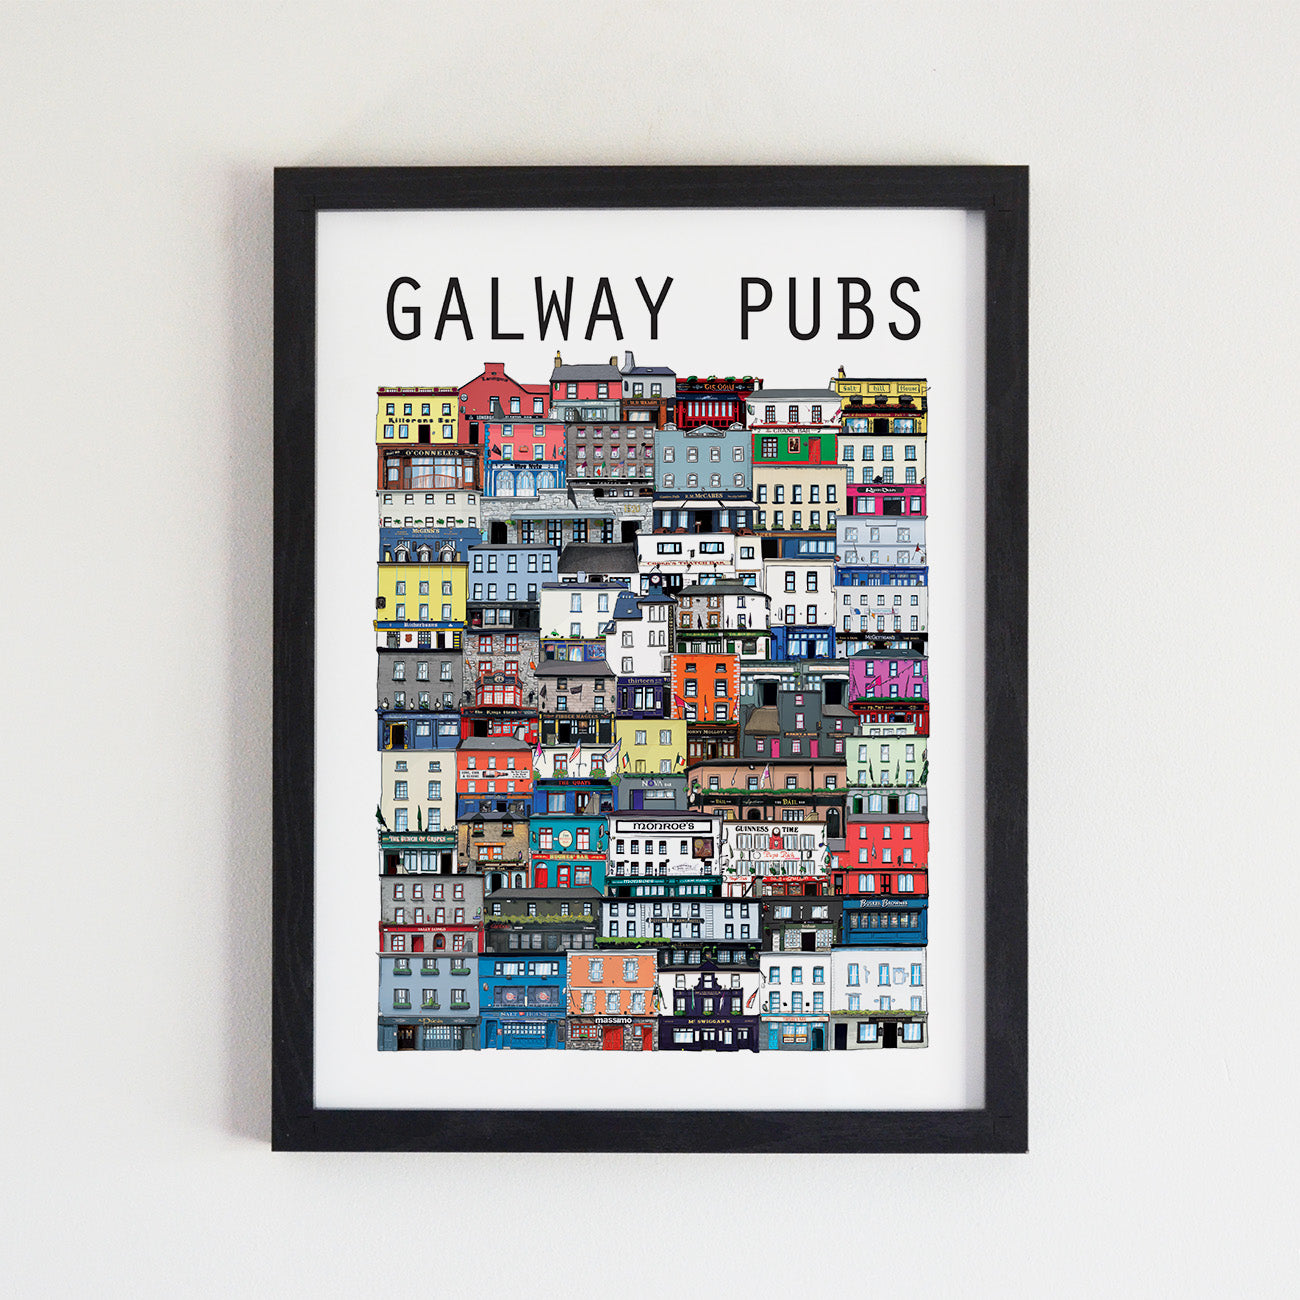 Galway Pubs 2nd Edition